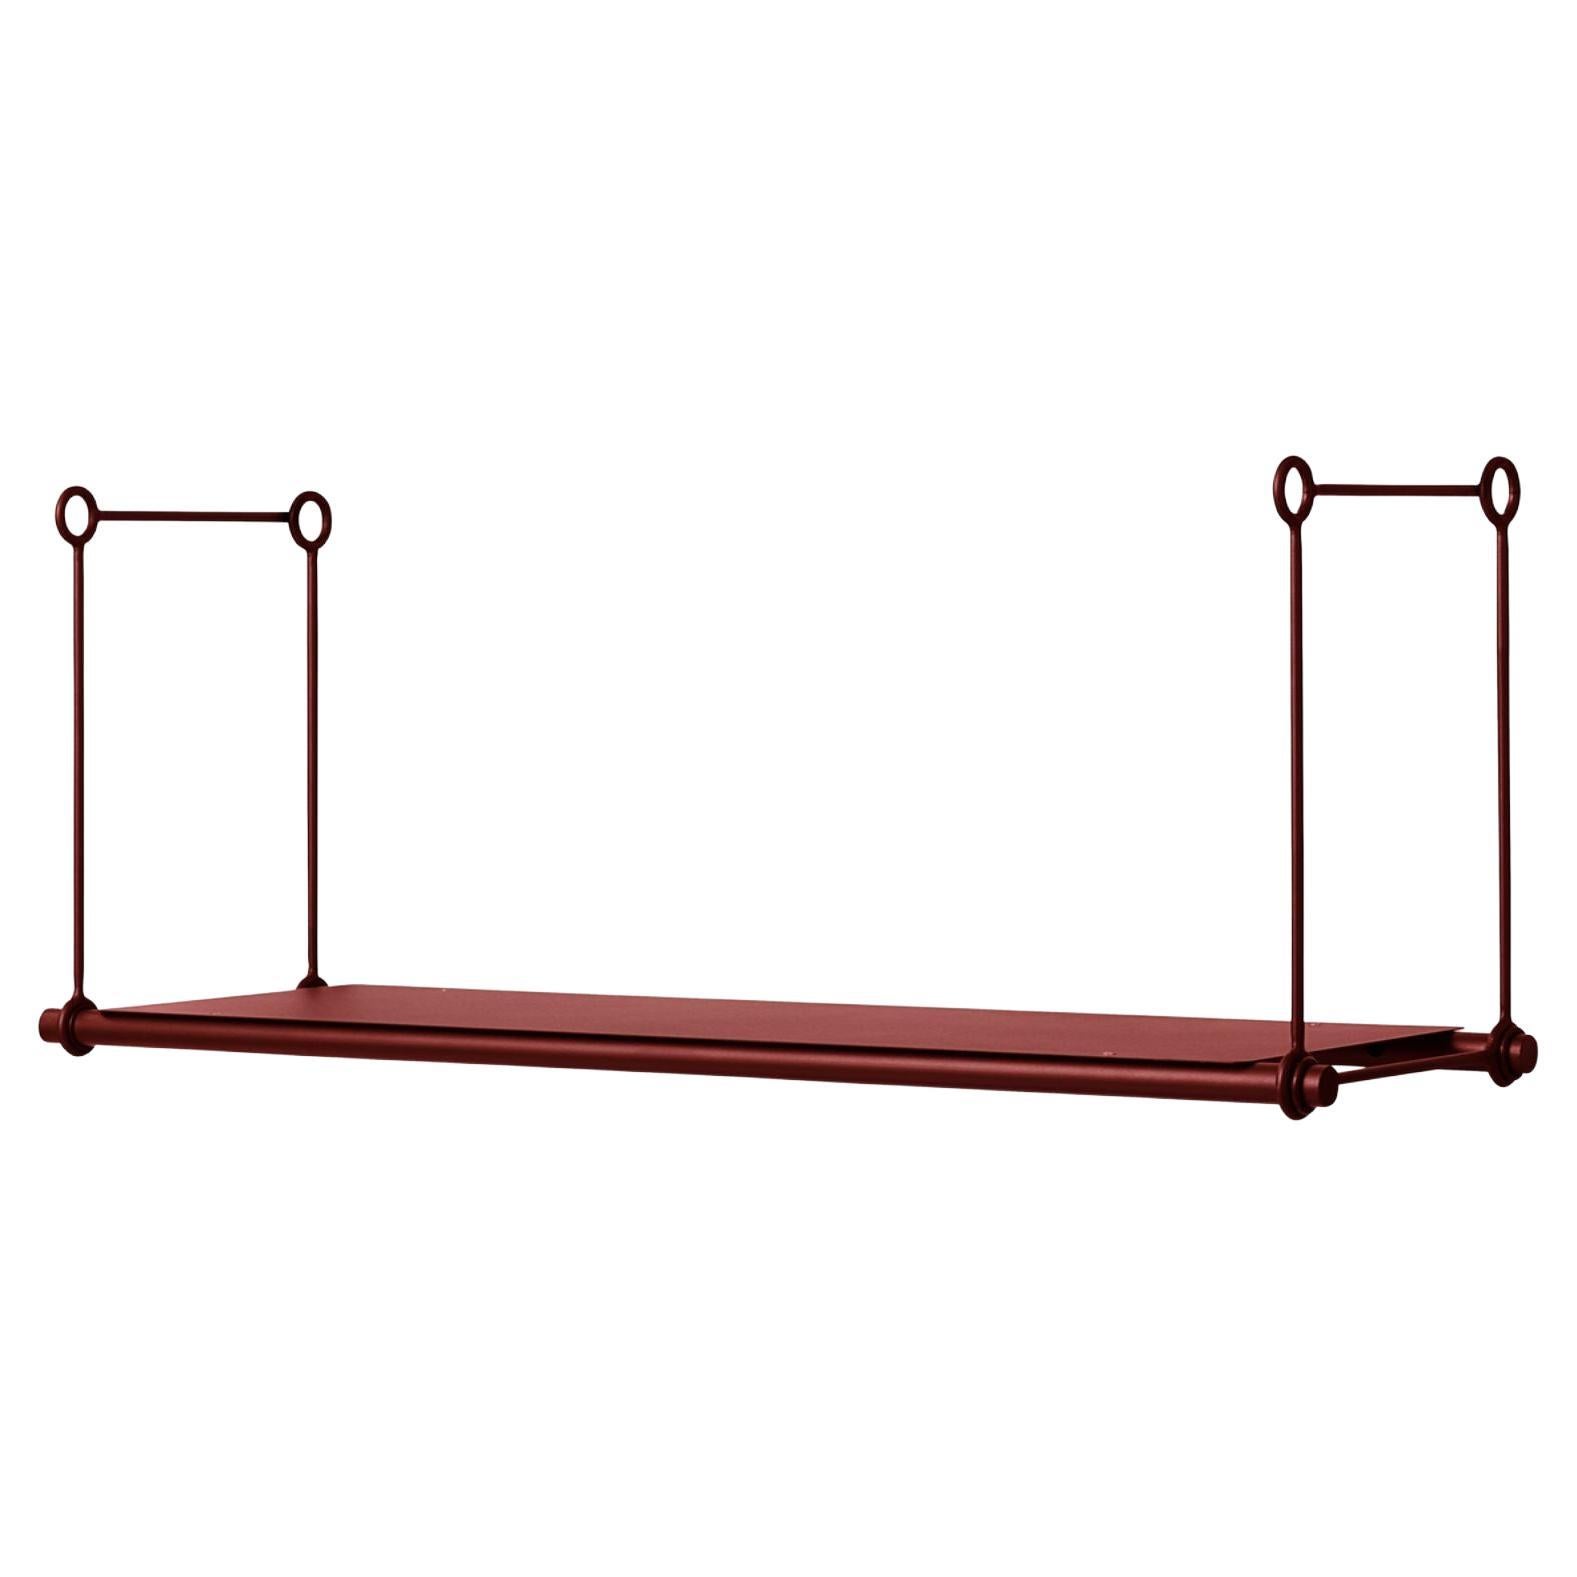 Parade 1 Shelf Extention Oxide Red by Warm Nordic